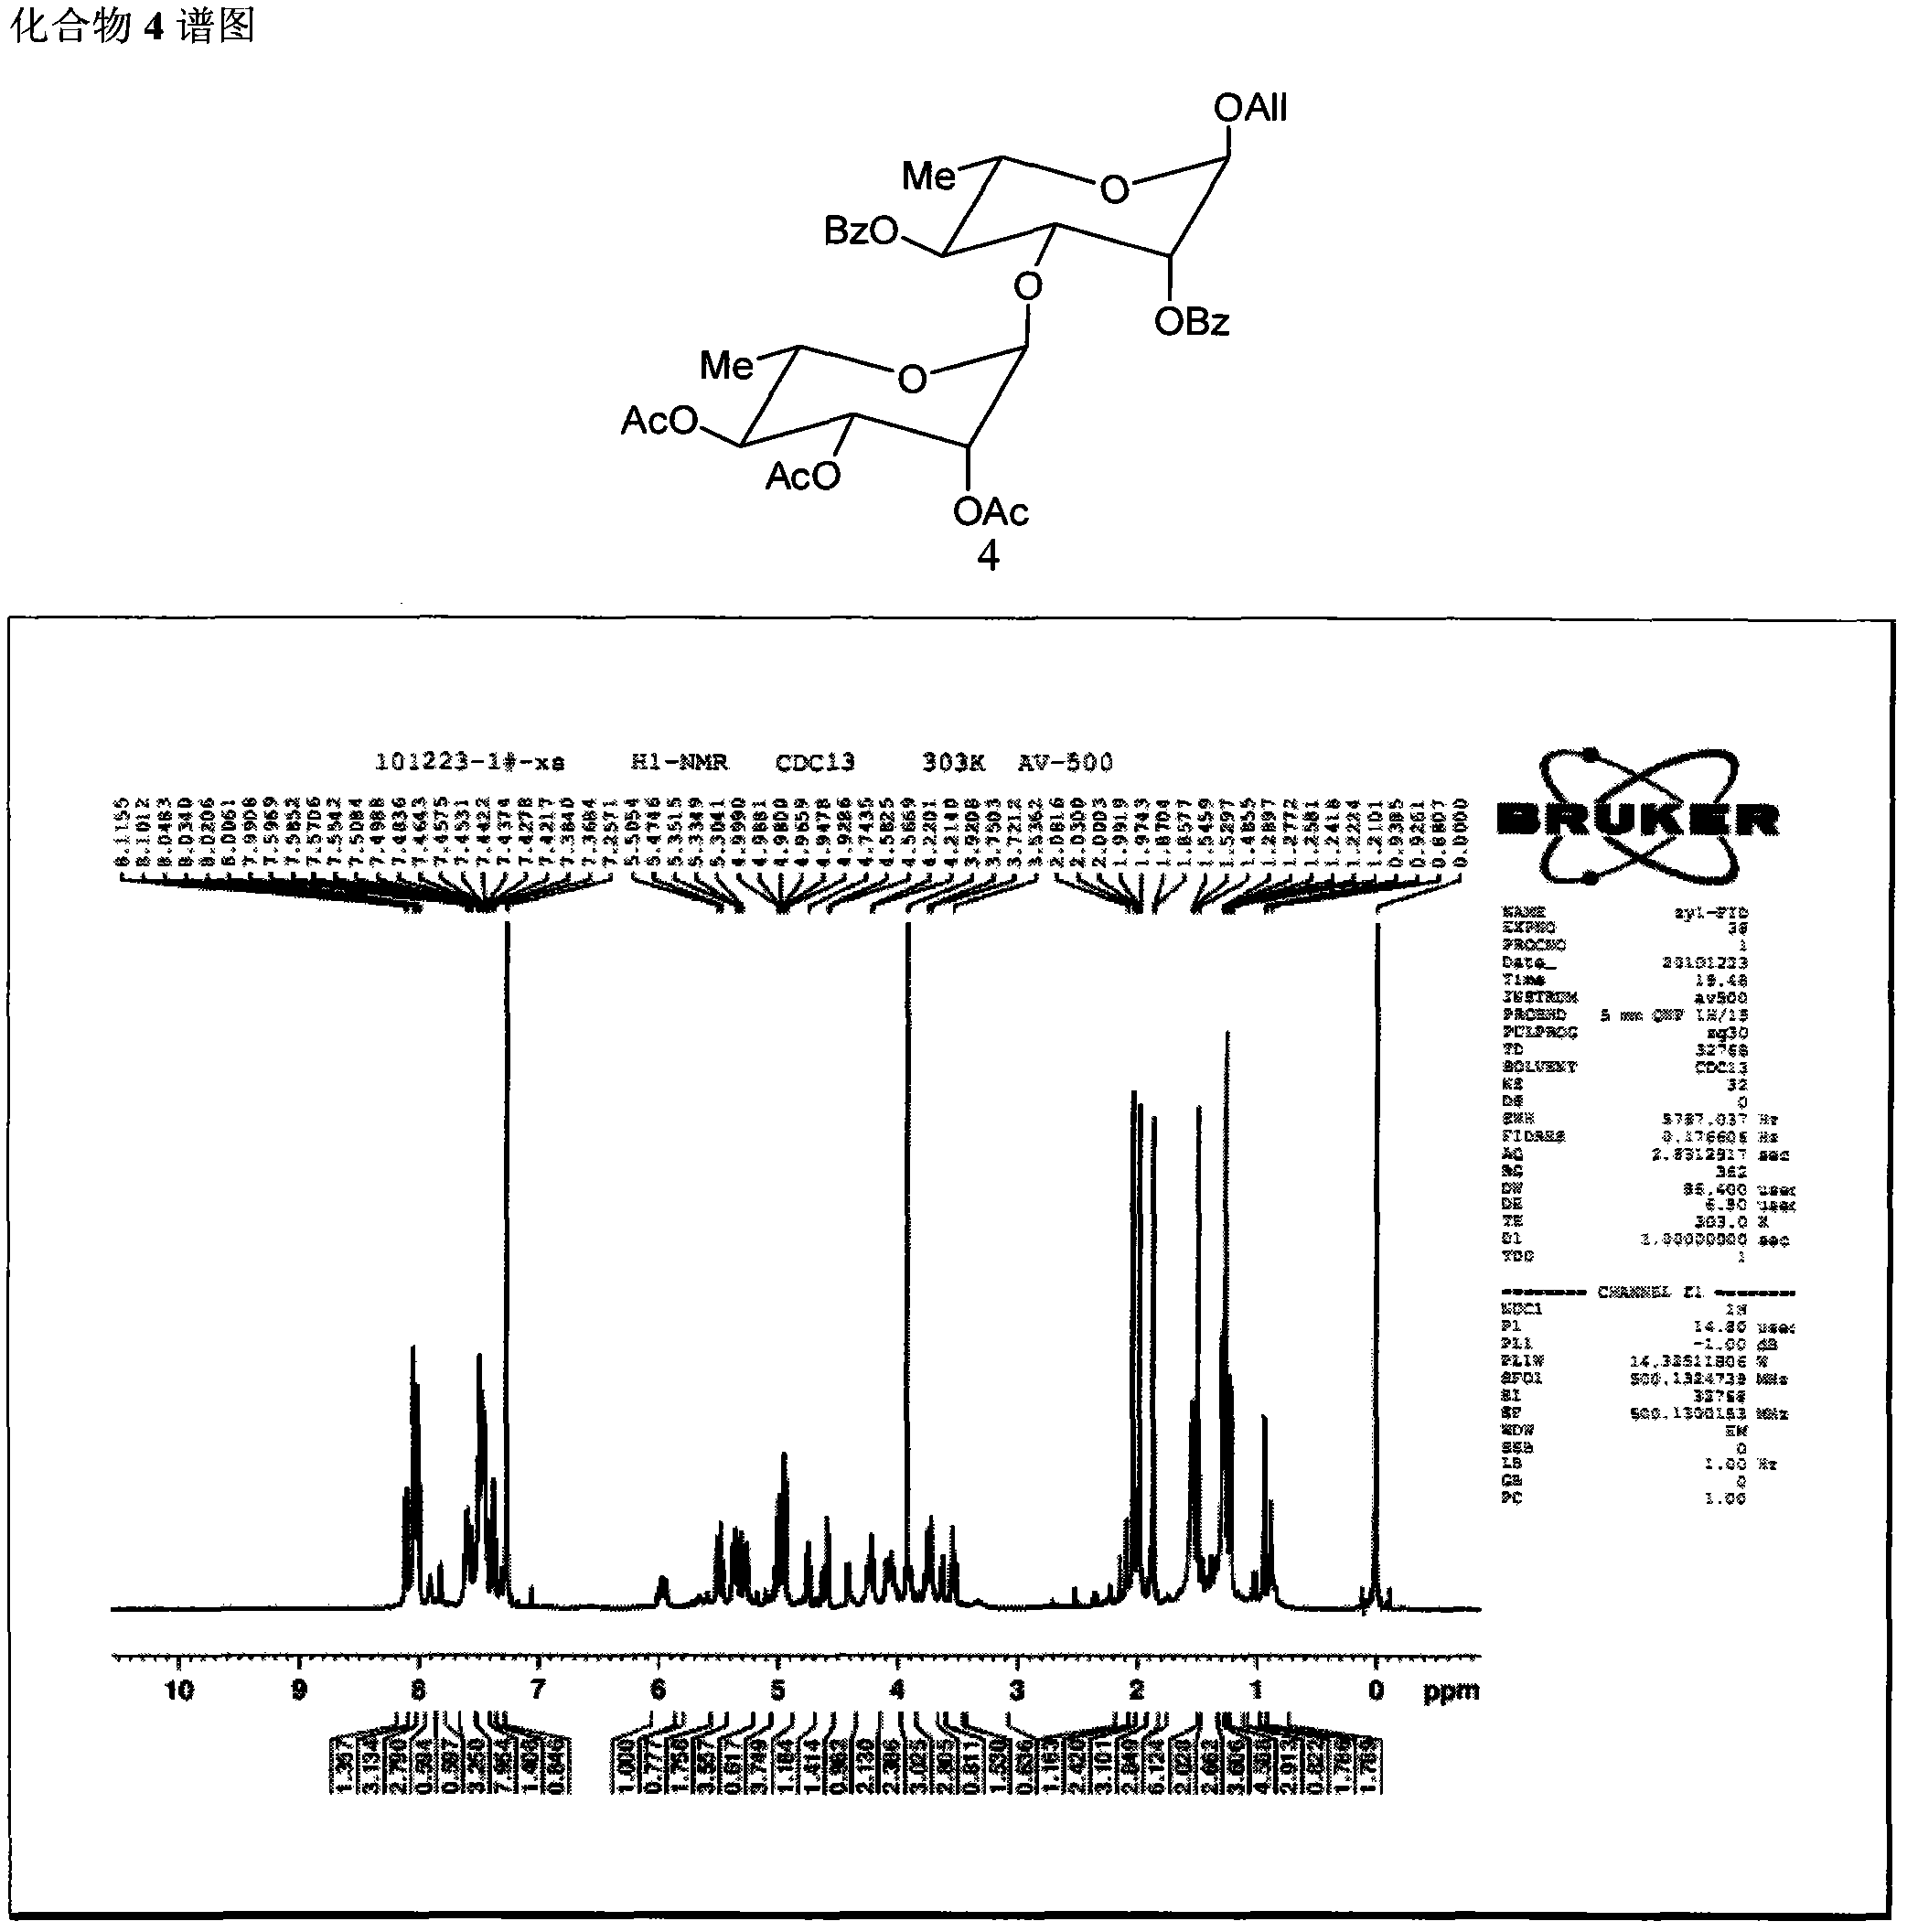 Method for synthesizing beta-D glucose(1-&gt;3)alpha-L rhamnose(1-3)alpha-L rhamnose(1-3)alpha-L rhamnose